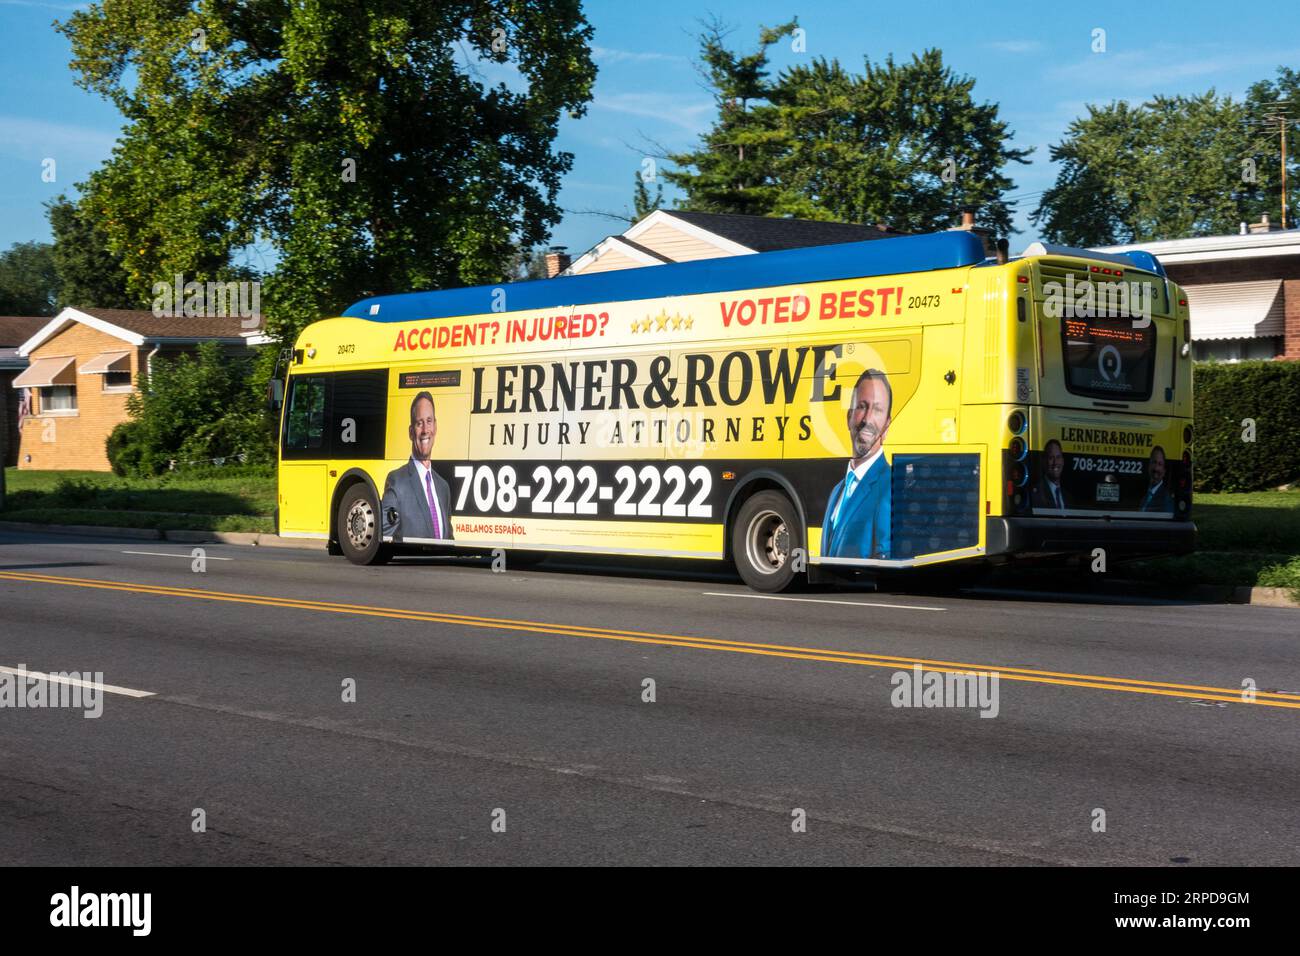 Injury lawyers advertisement on local bus Stock Photo